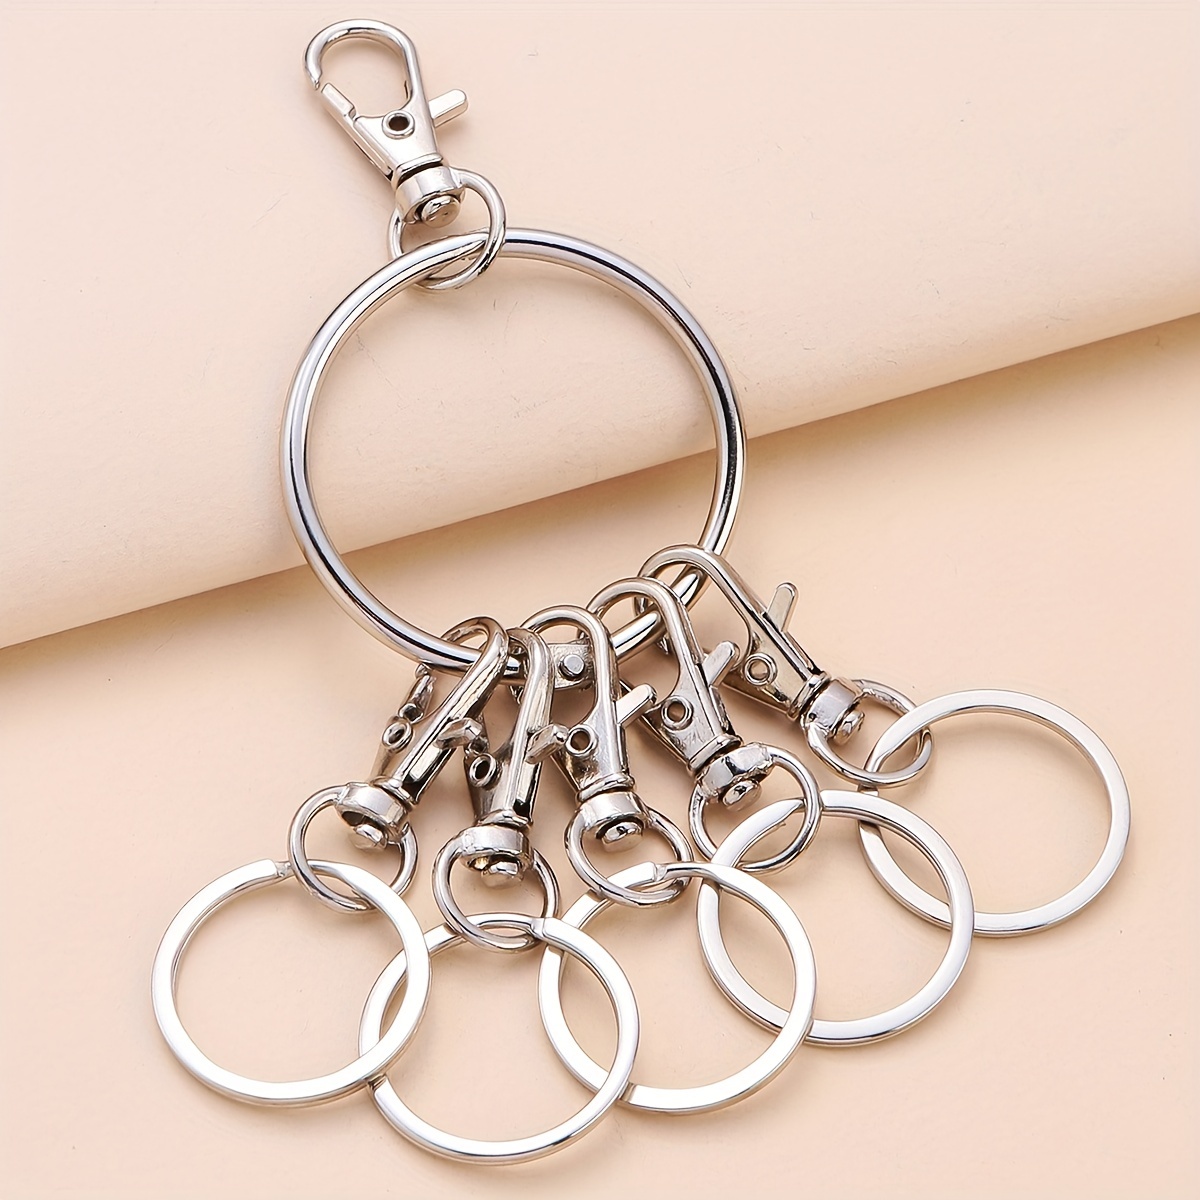 luzen 1PC Portable Metal Ring Key Organizer Holder with Swivel Clasps  Janitor Key Ring for Warehouse Office School Home Use, Silver